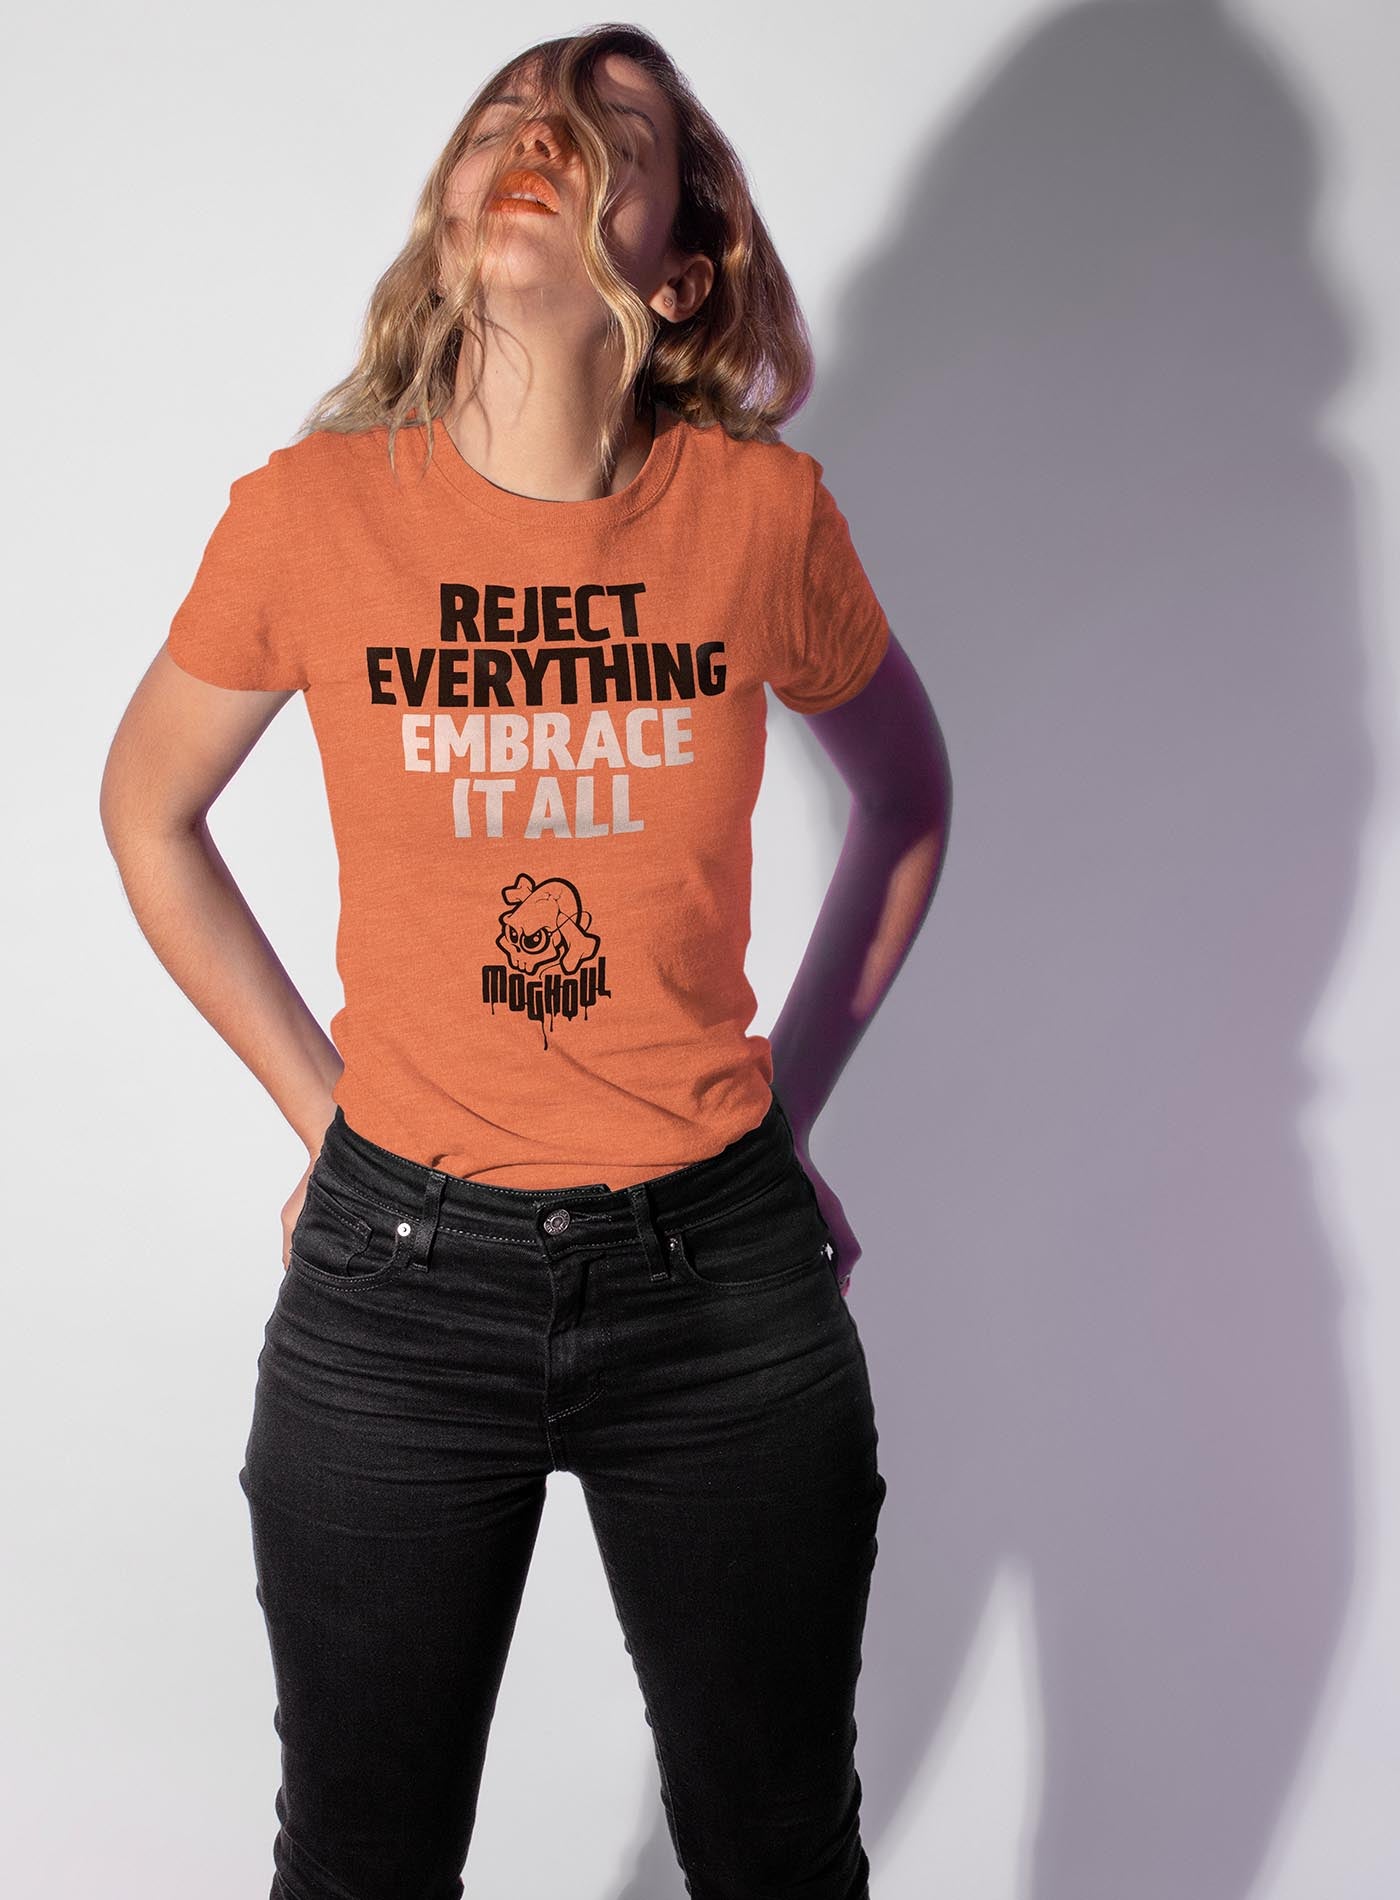 Female modeling an Orange unisex t-shirt featuring the paradoxical phrase "Reject everything, embrace it all" and the moghoul logo.